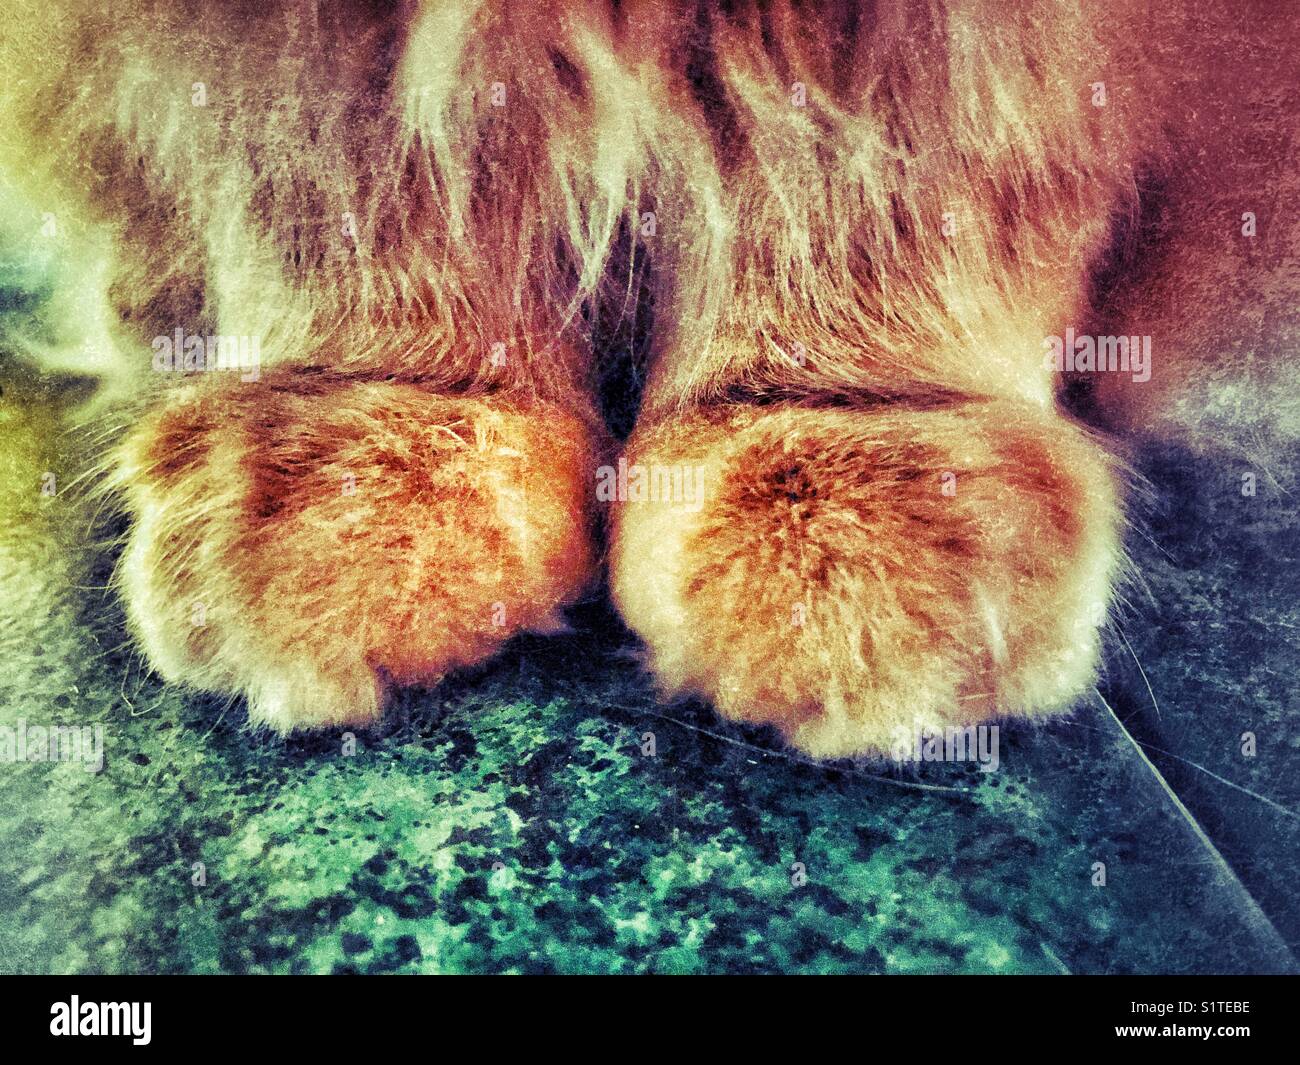 Closeup of adult male orange tabby cat paws Stock Photo